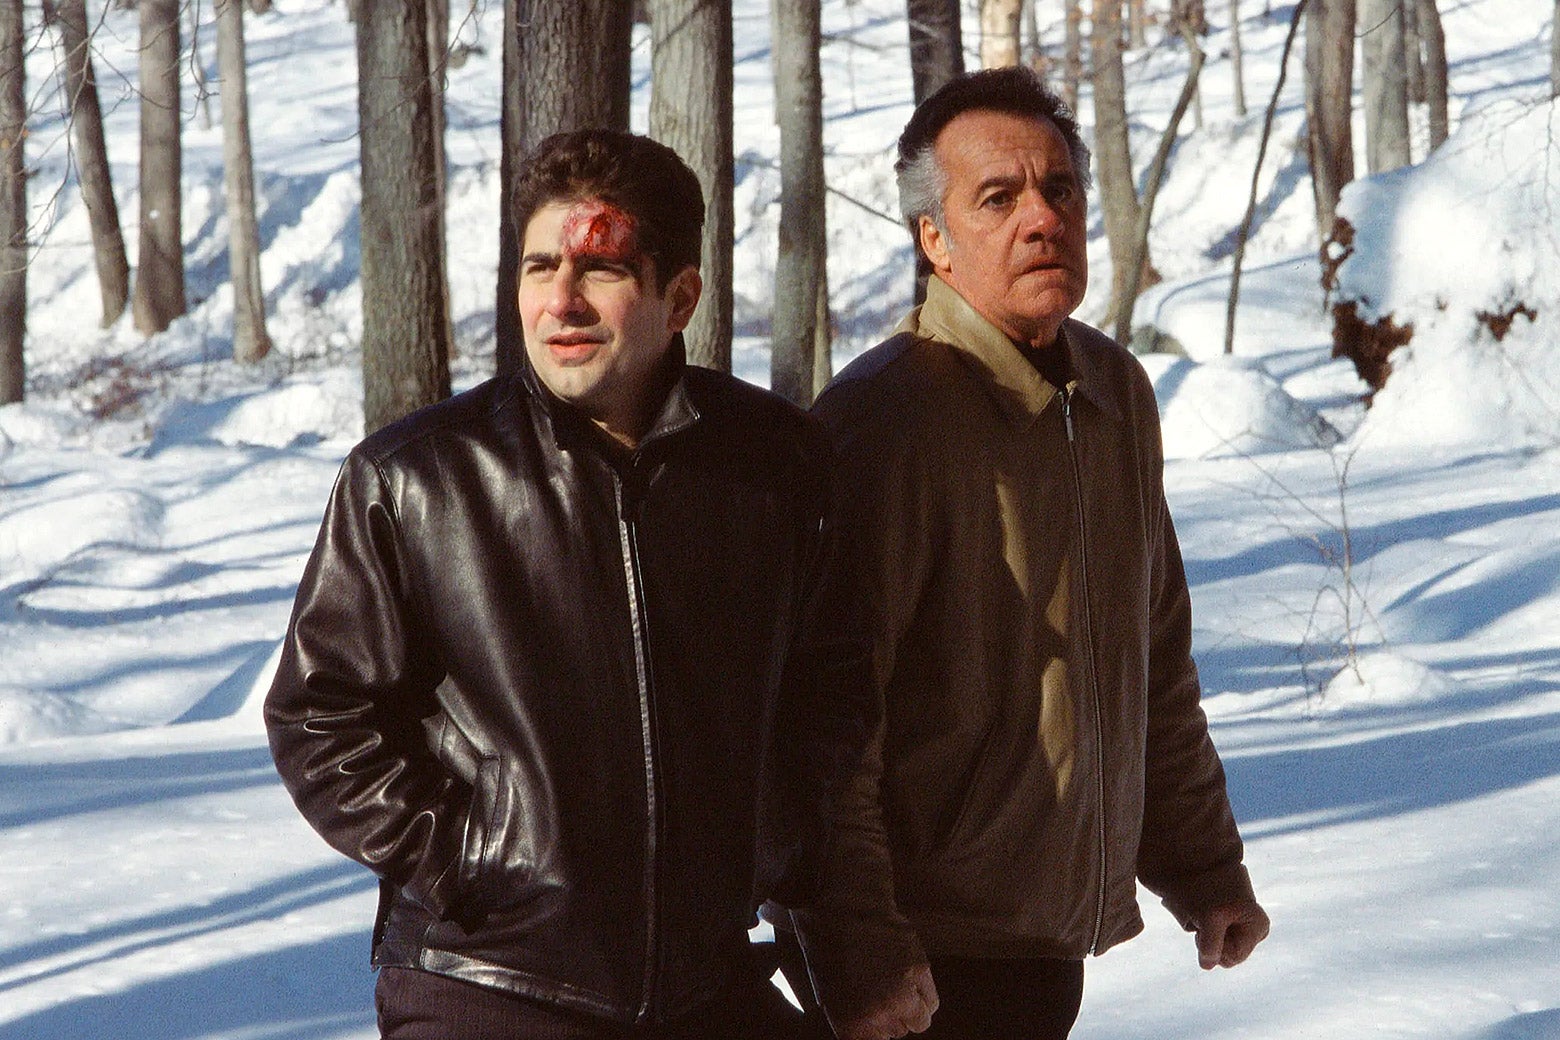 A bloodied Christopher and Paulie walk in the snowy woods.